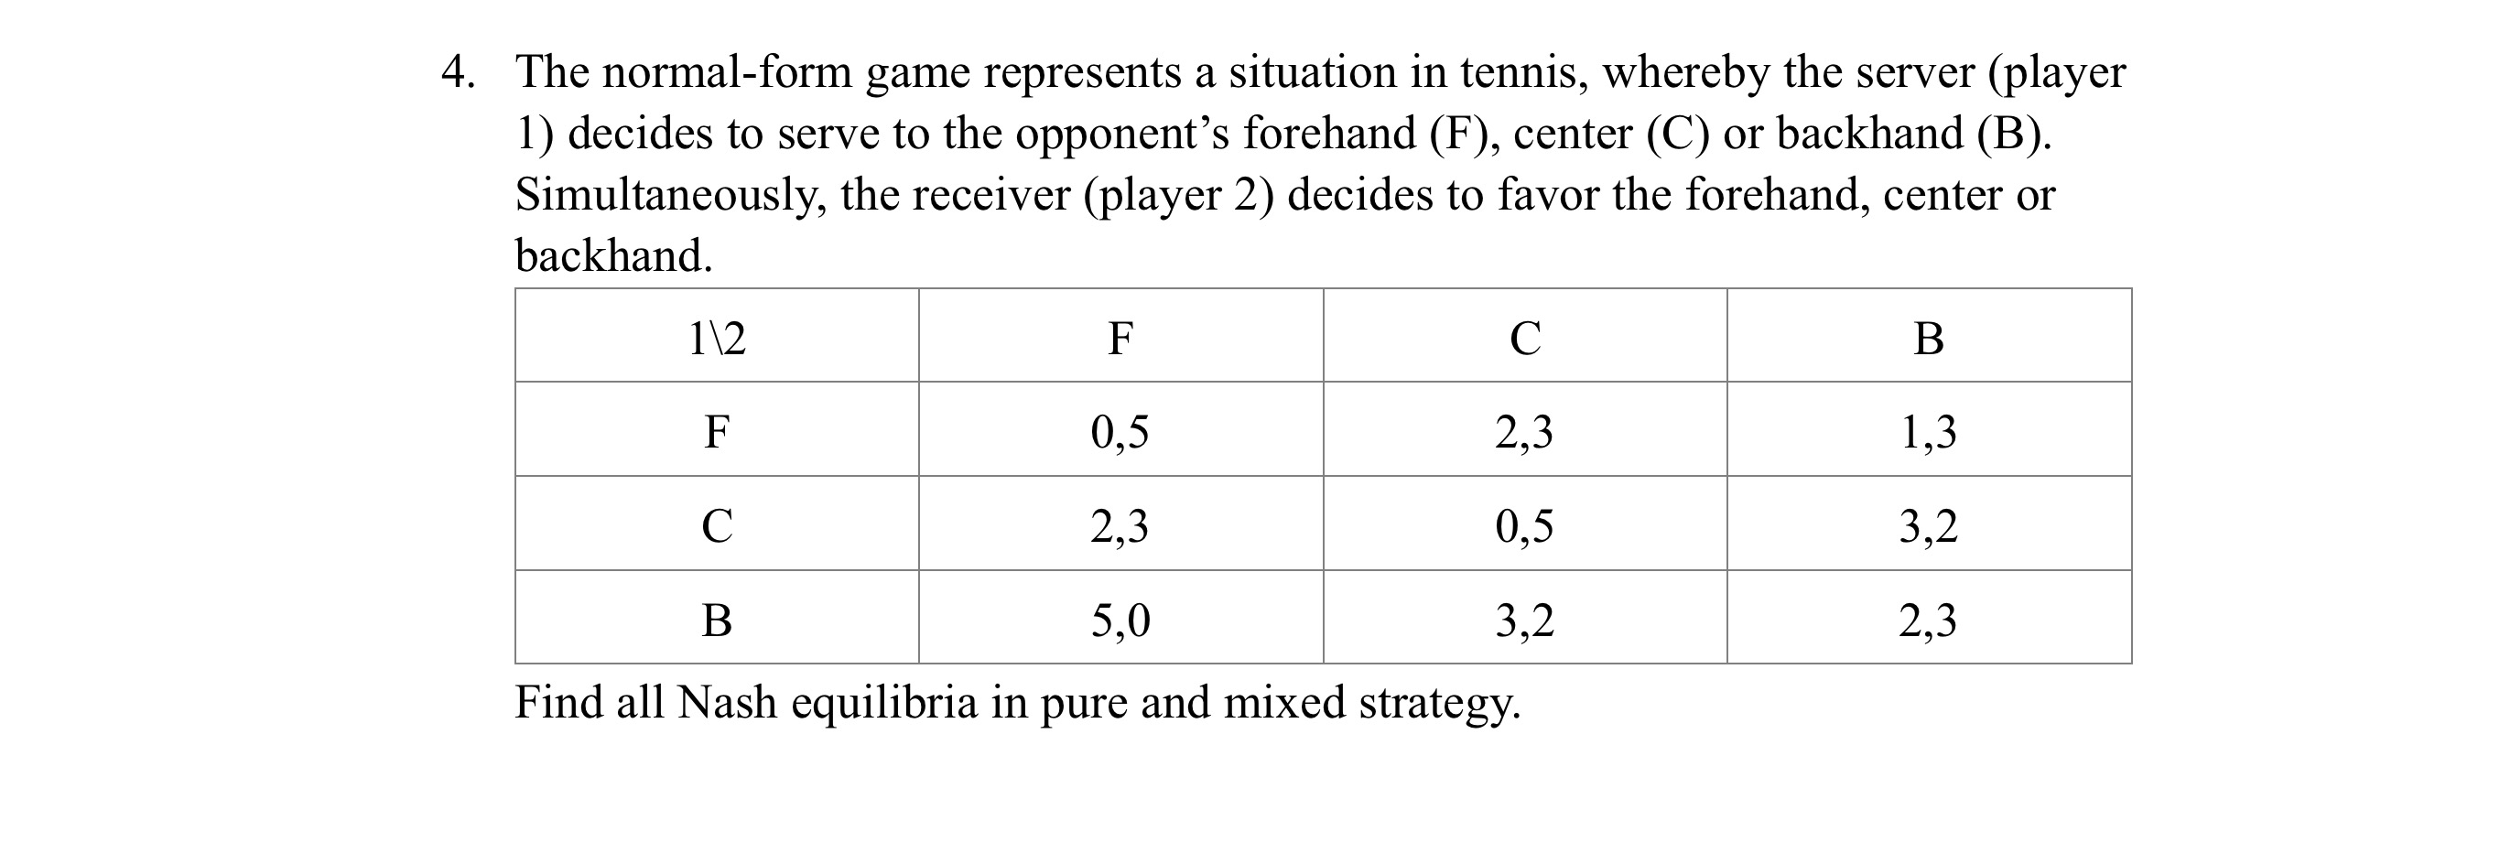 an-example-of-a-3-3-normal-form-game-column-player-download-table